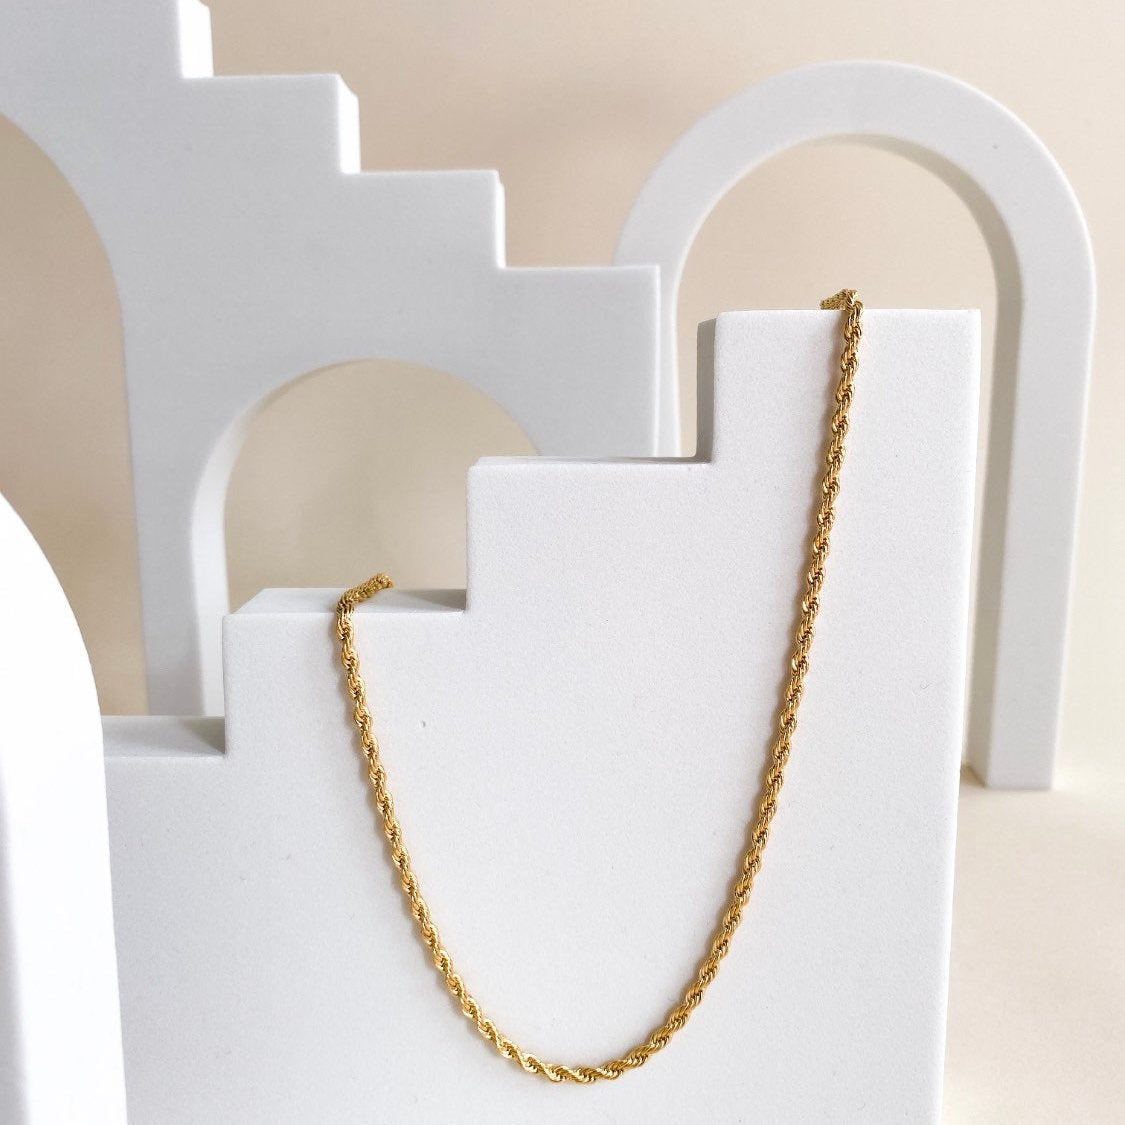 Thick double roped necklace - 3mm - Tarnish resistant - high quality - 18 inches - Gold roped chain